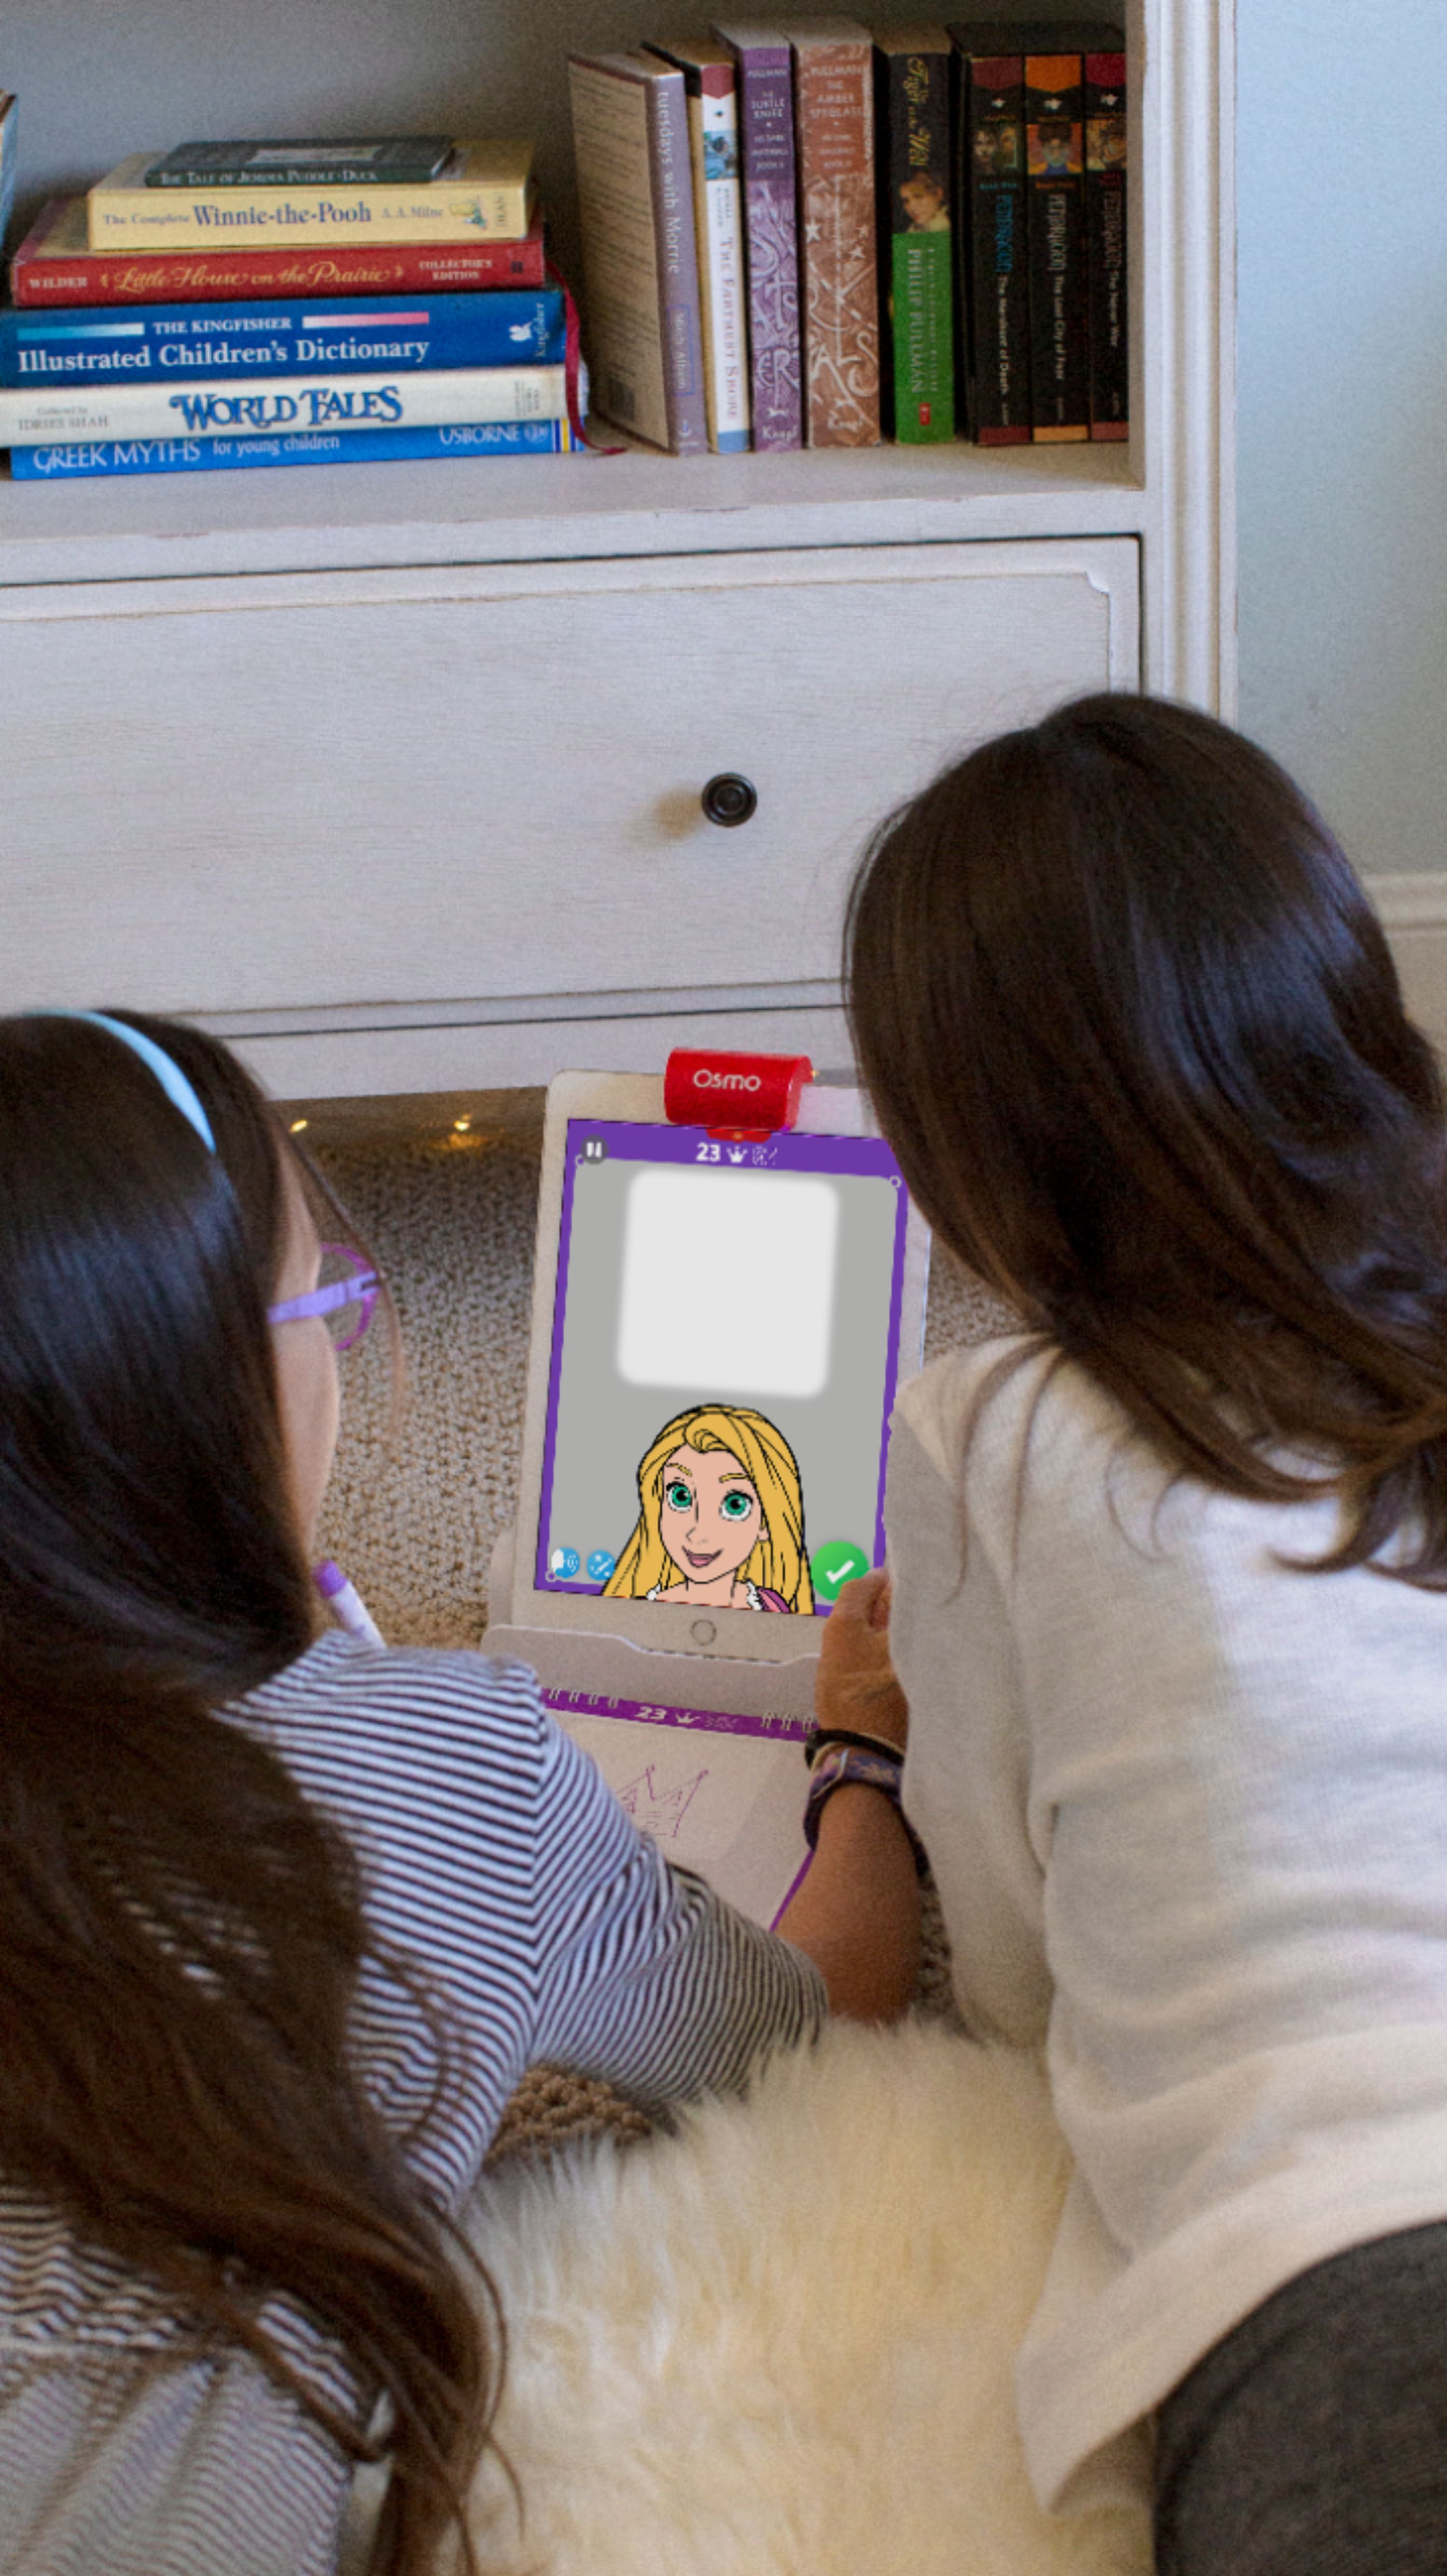  Osmo - Super Studio Disney Princess Starter Kit for iPad - Ages  5-11 - Drawing Activities iPad Base Included : Electronics